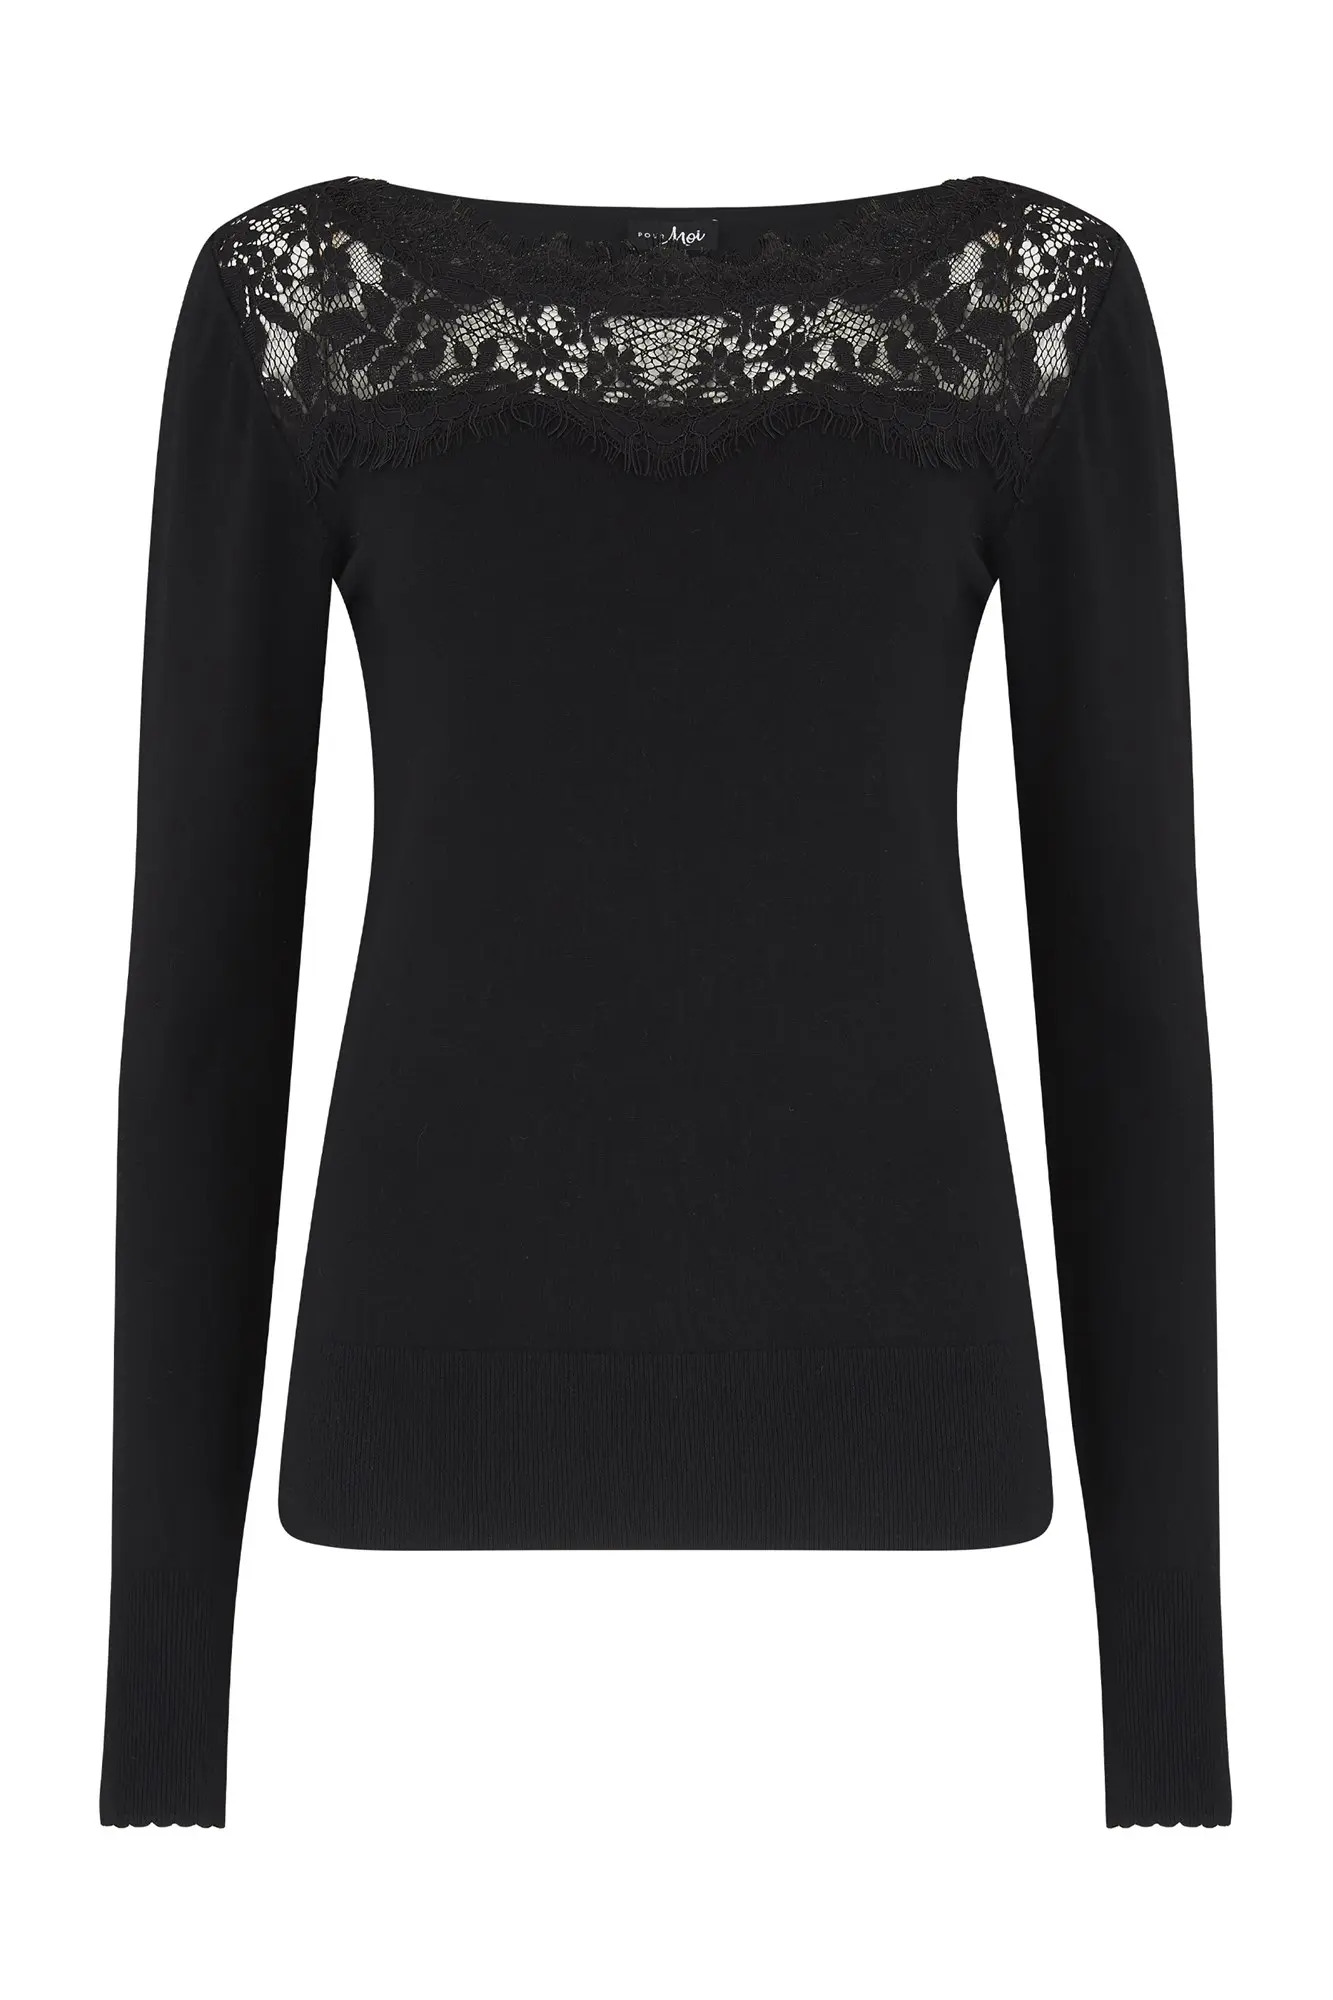 Lace Insert Compact Ecovero Knit Jumper | Pour Moi | Lace Insert ...